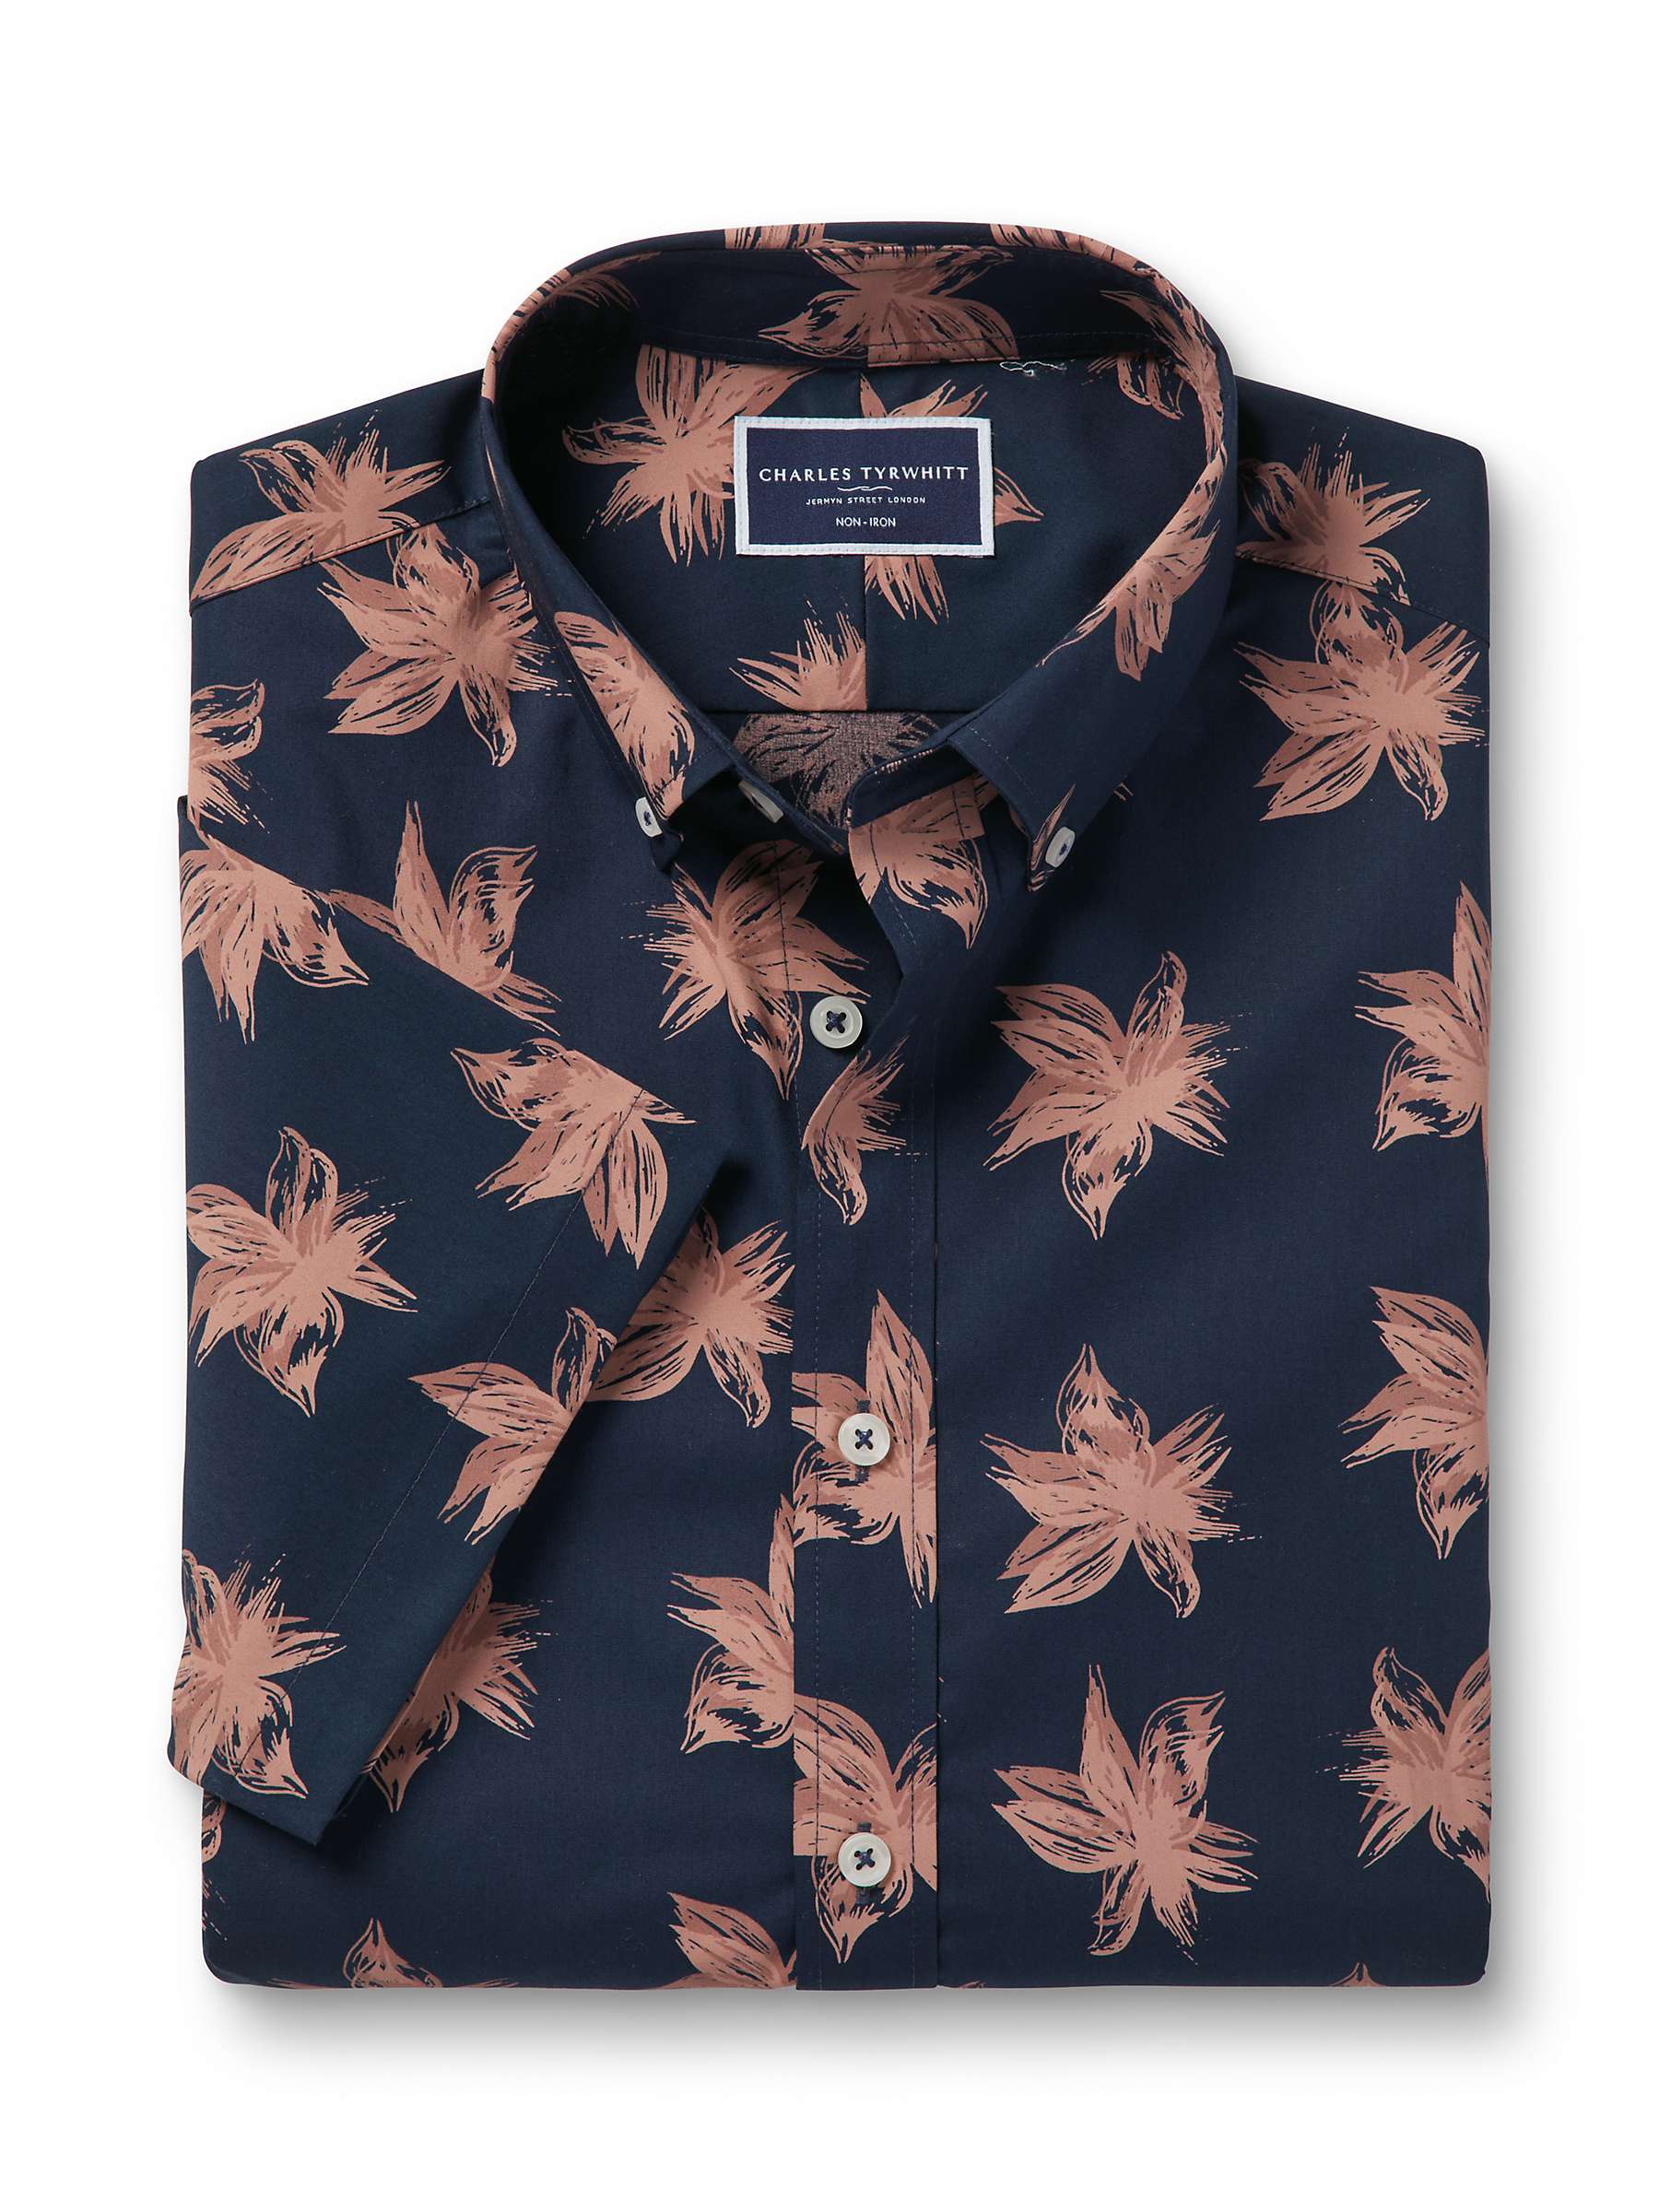 Buy Charles Tyrwhitt Large Floral Non-Iron Stretch Shirt, Navy Online at johnlewis.com